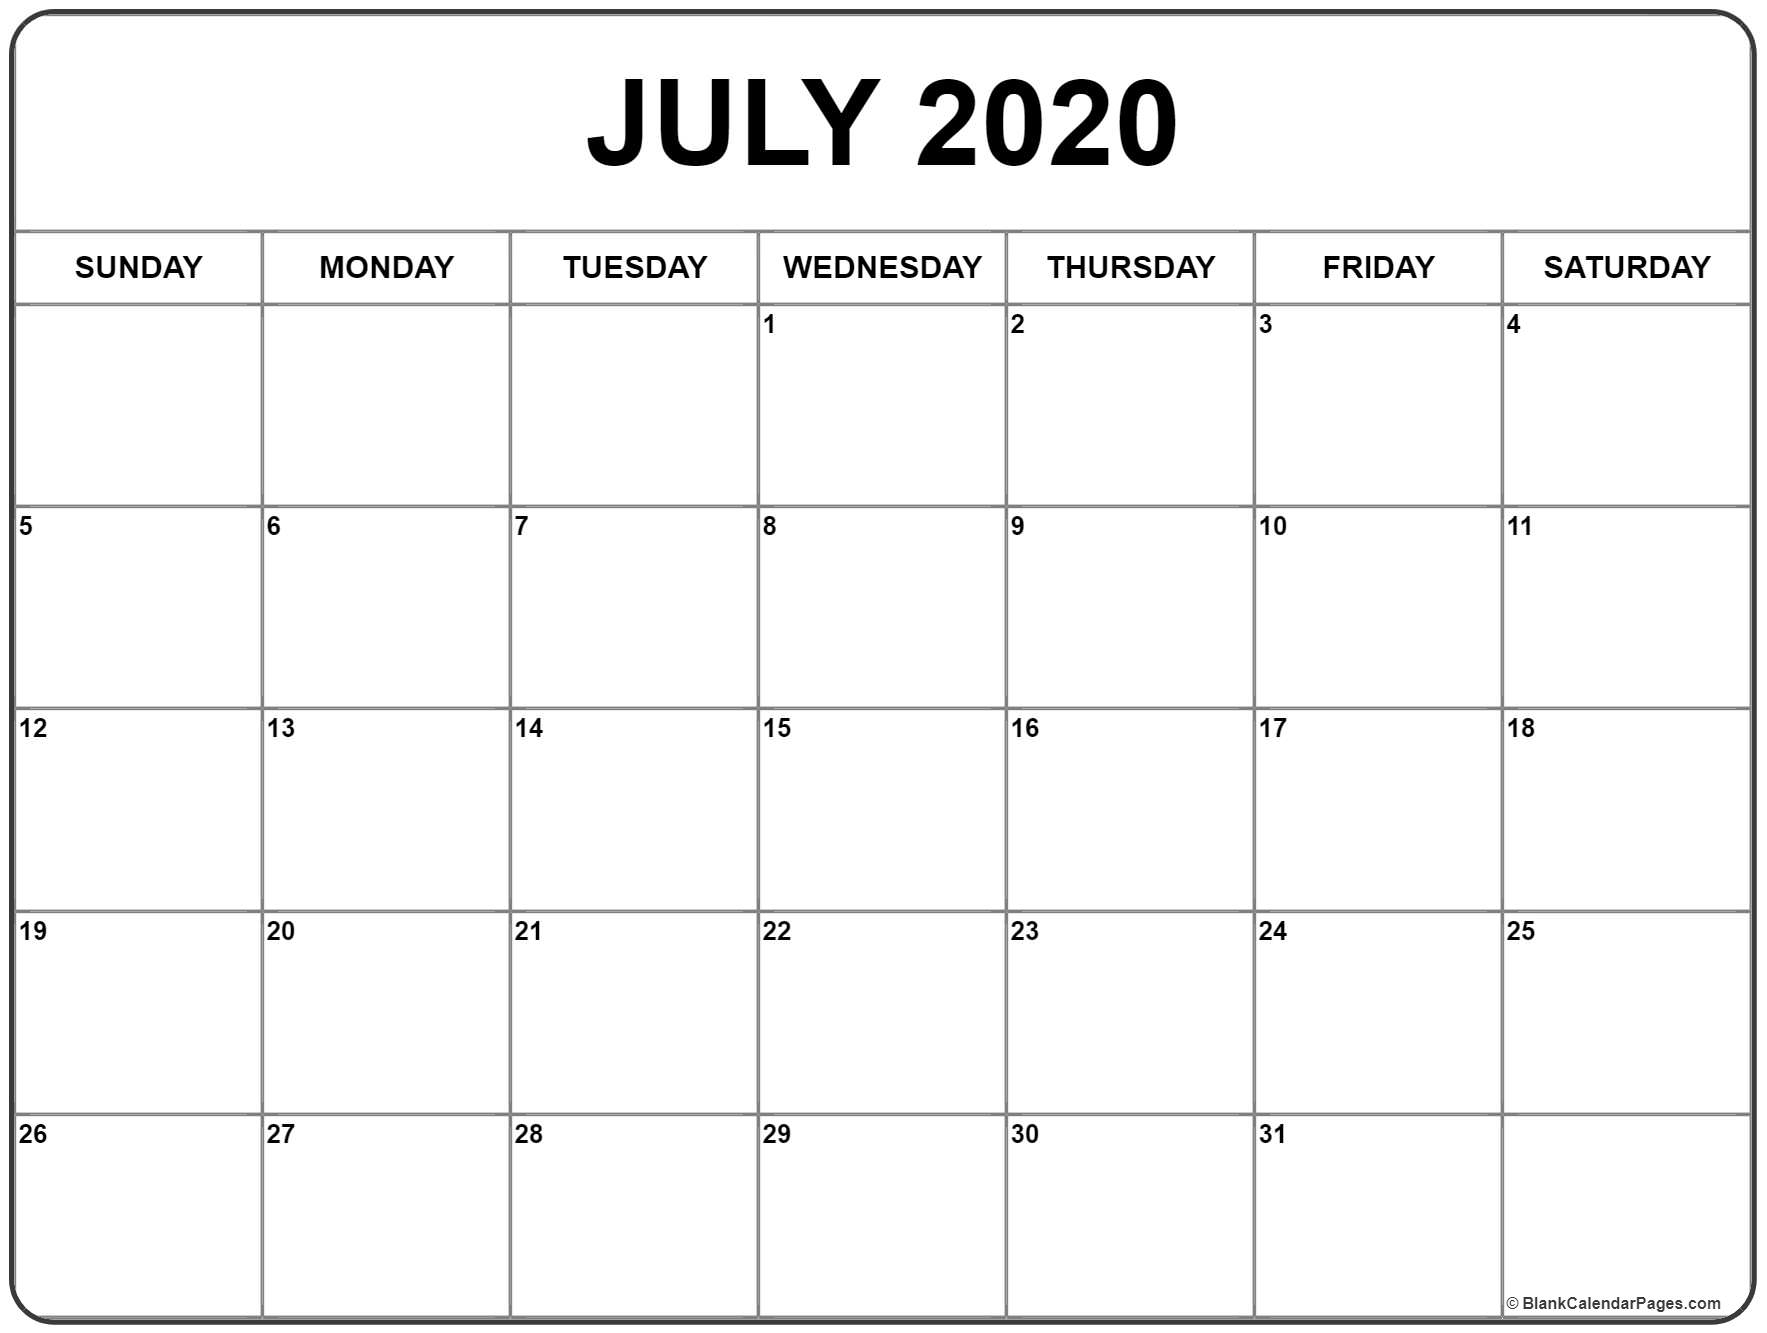 July 2020 Calendar | Free Printable Monthly Calendars within 2020 Printabl Calendar With Space To Write Free